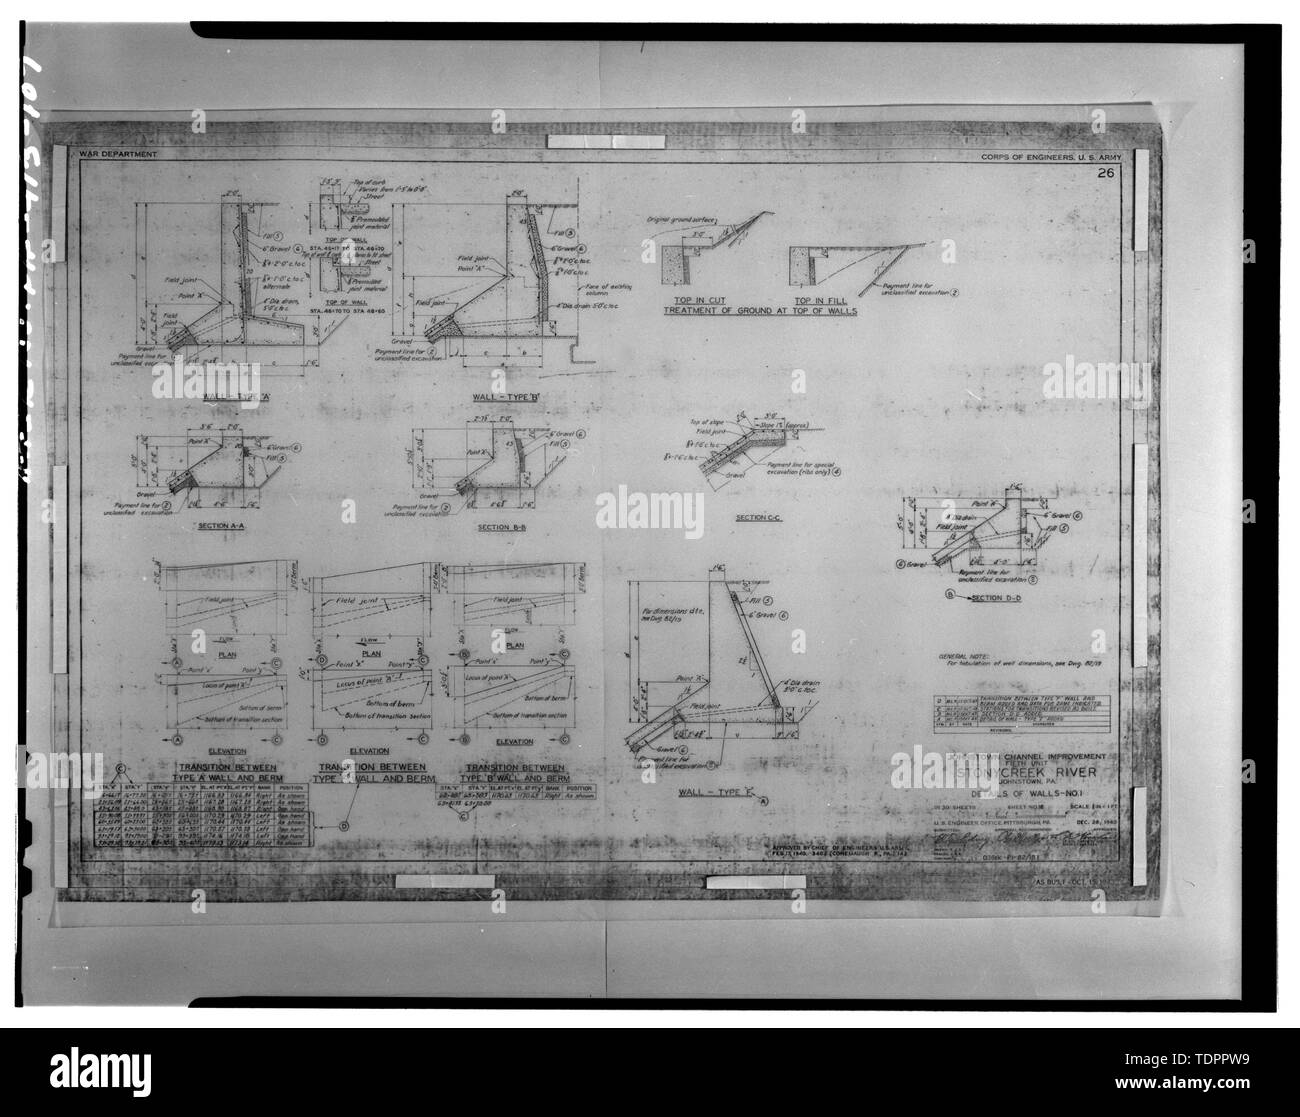 Photographic copy of original drawing, by Corps of Engineers, U.S. Army, December 28, 1940 (original in possession of Corps of Engineers, U.S. Army, Pittsburgh District, Engineering Division files) Unit 5, detail of walls -1 - Johnstown Local Flood Protection Project, Beginning on Conemaugh River approx 3.8 miles downstream from confluence of Little Conemaugh and Stony Creek Rivers at Johnstown, Johnstown, Cambria County, PA Stock Photo